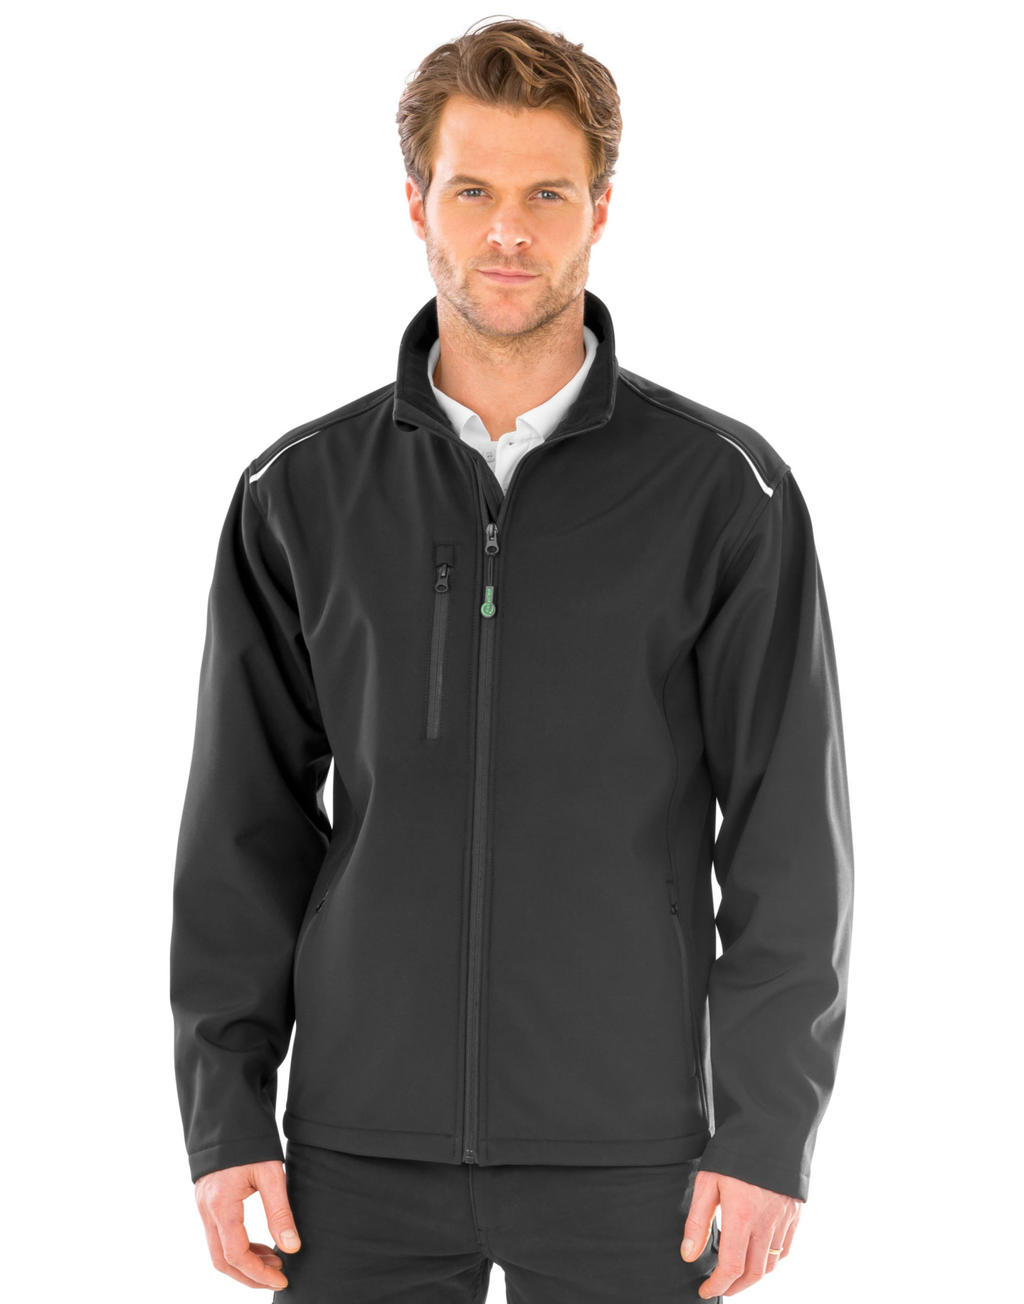  Recycled 3-Layer Printable Softshell Jacket in Farbe Black